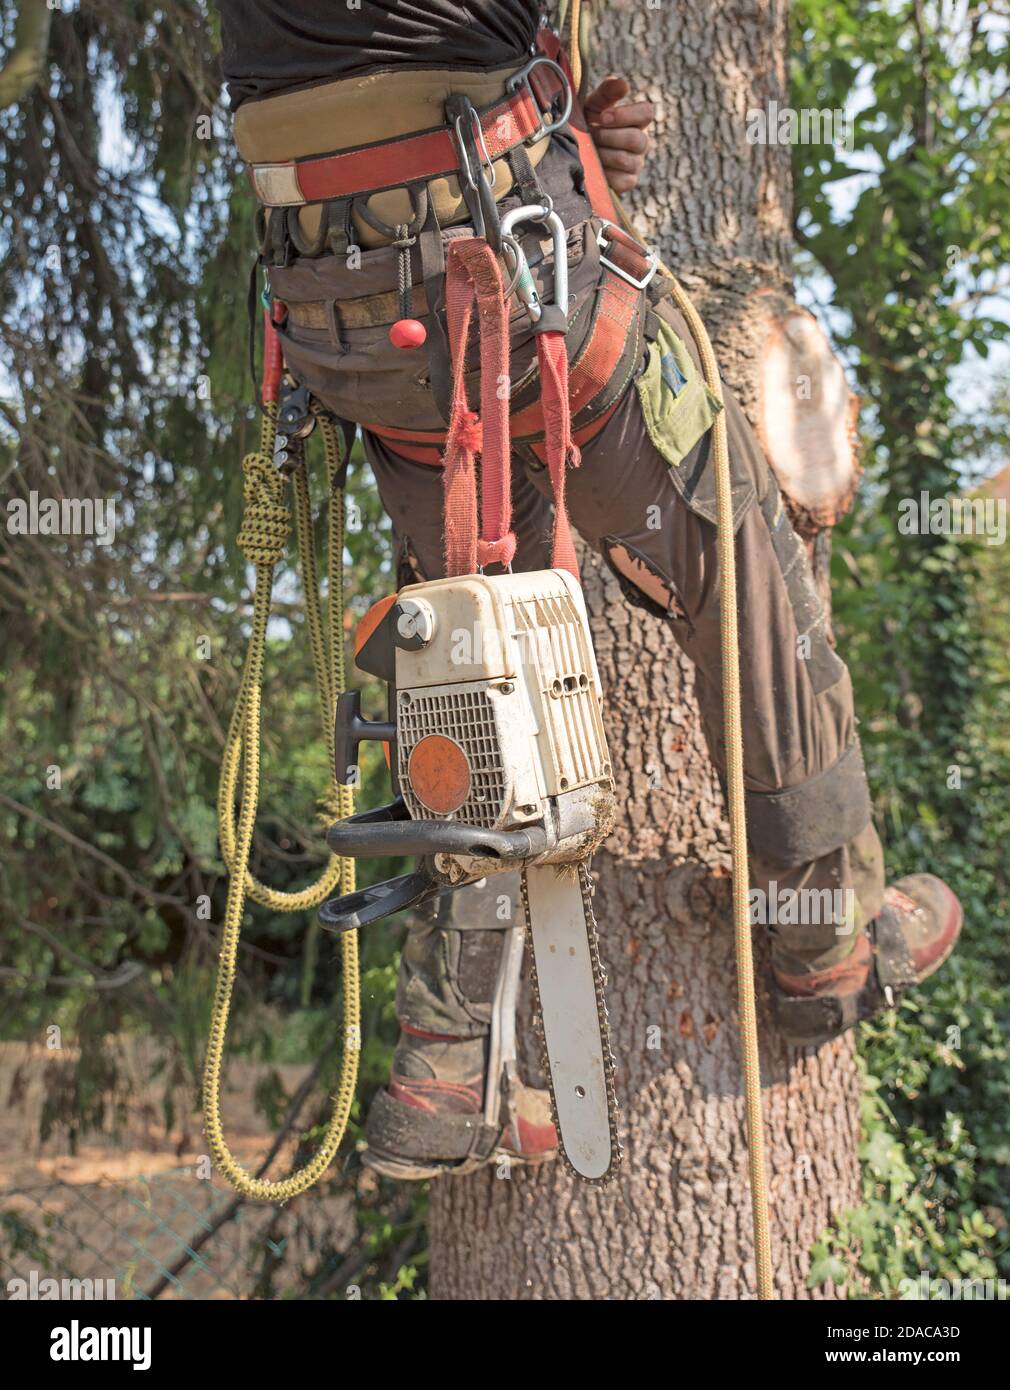 Arborist with his harness and tools ready to climb a tree Stock Photo